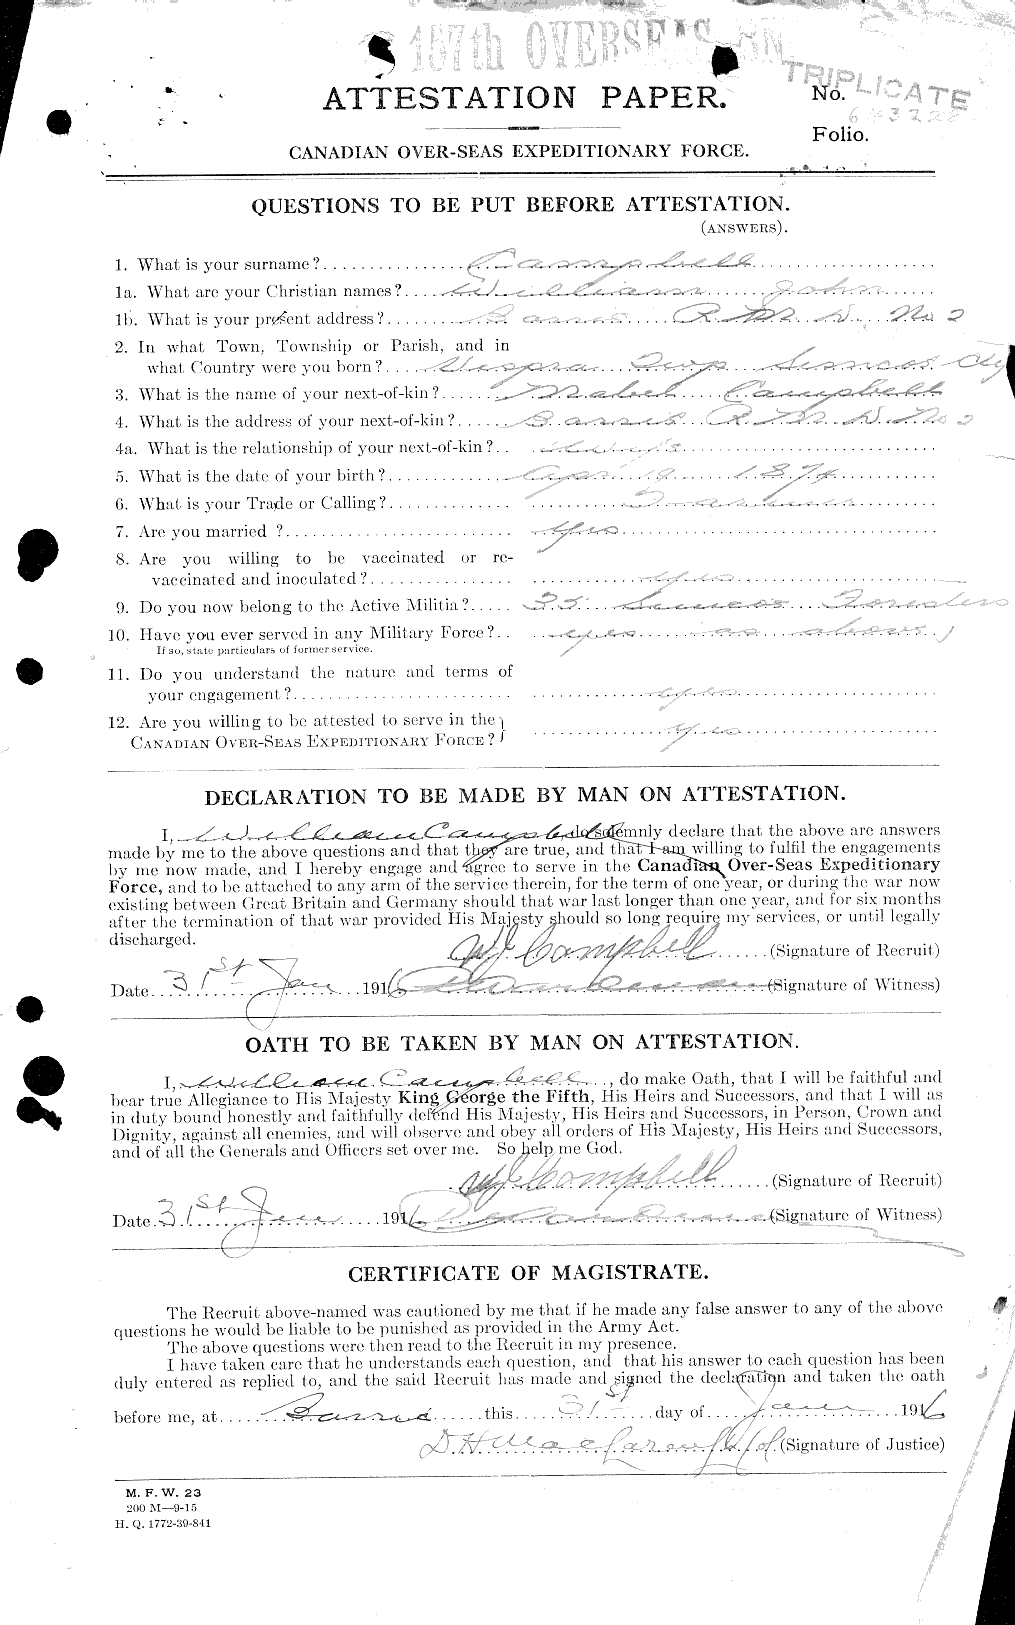 Personnel Records of the First World War - CEF 008702a